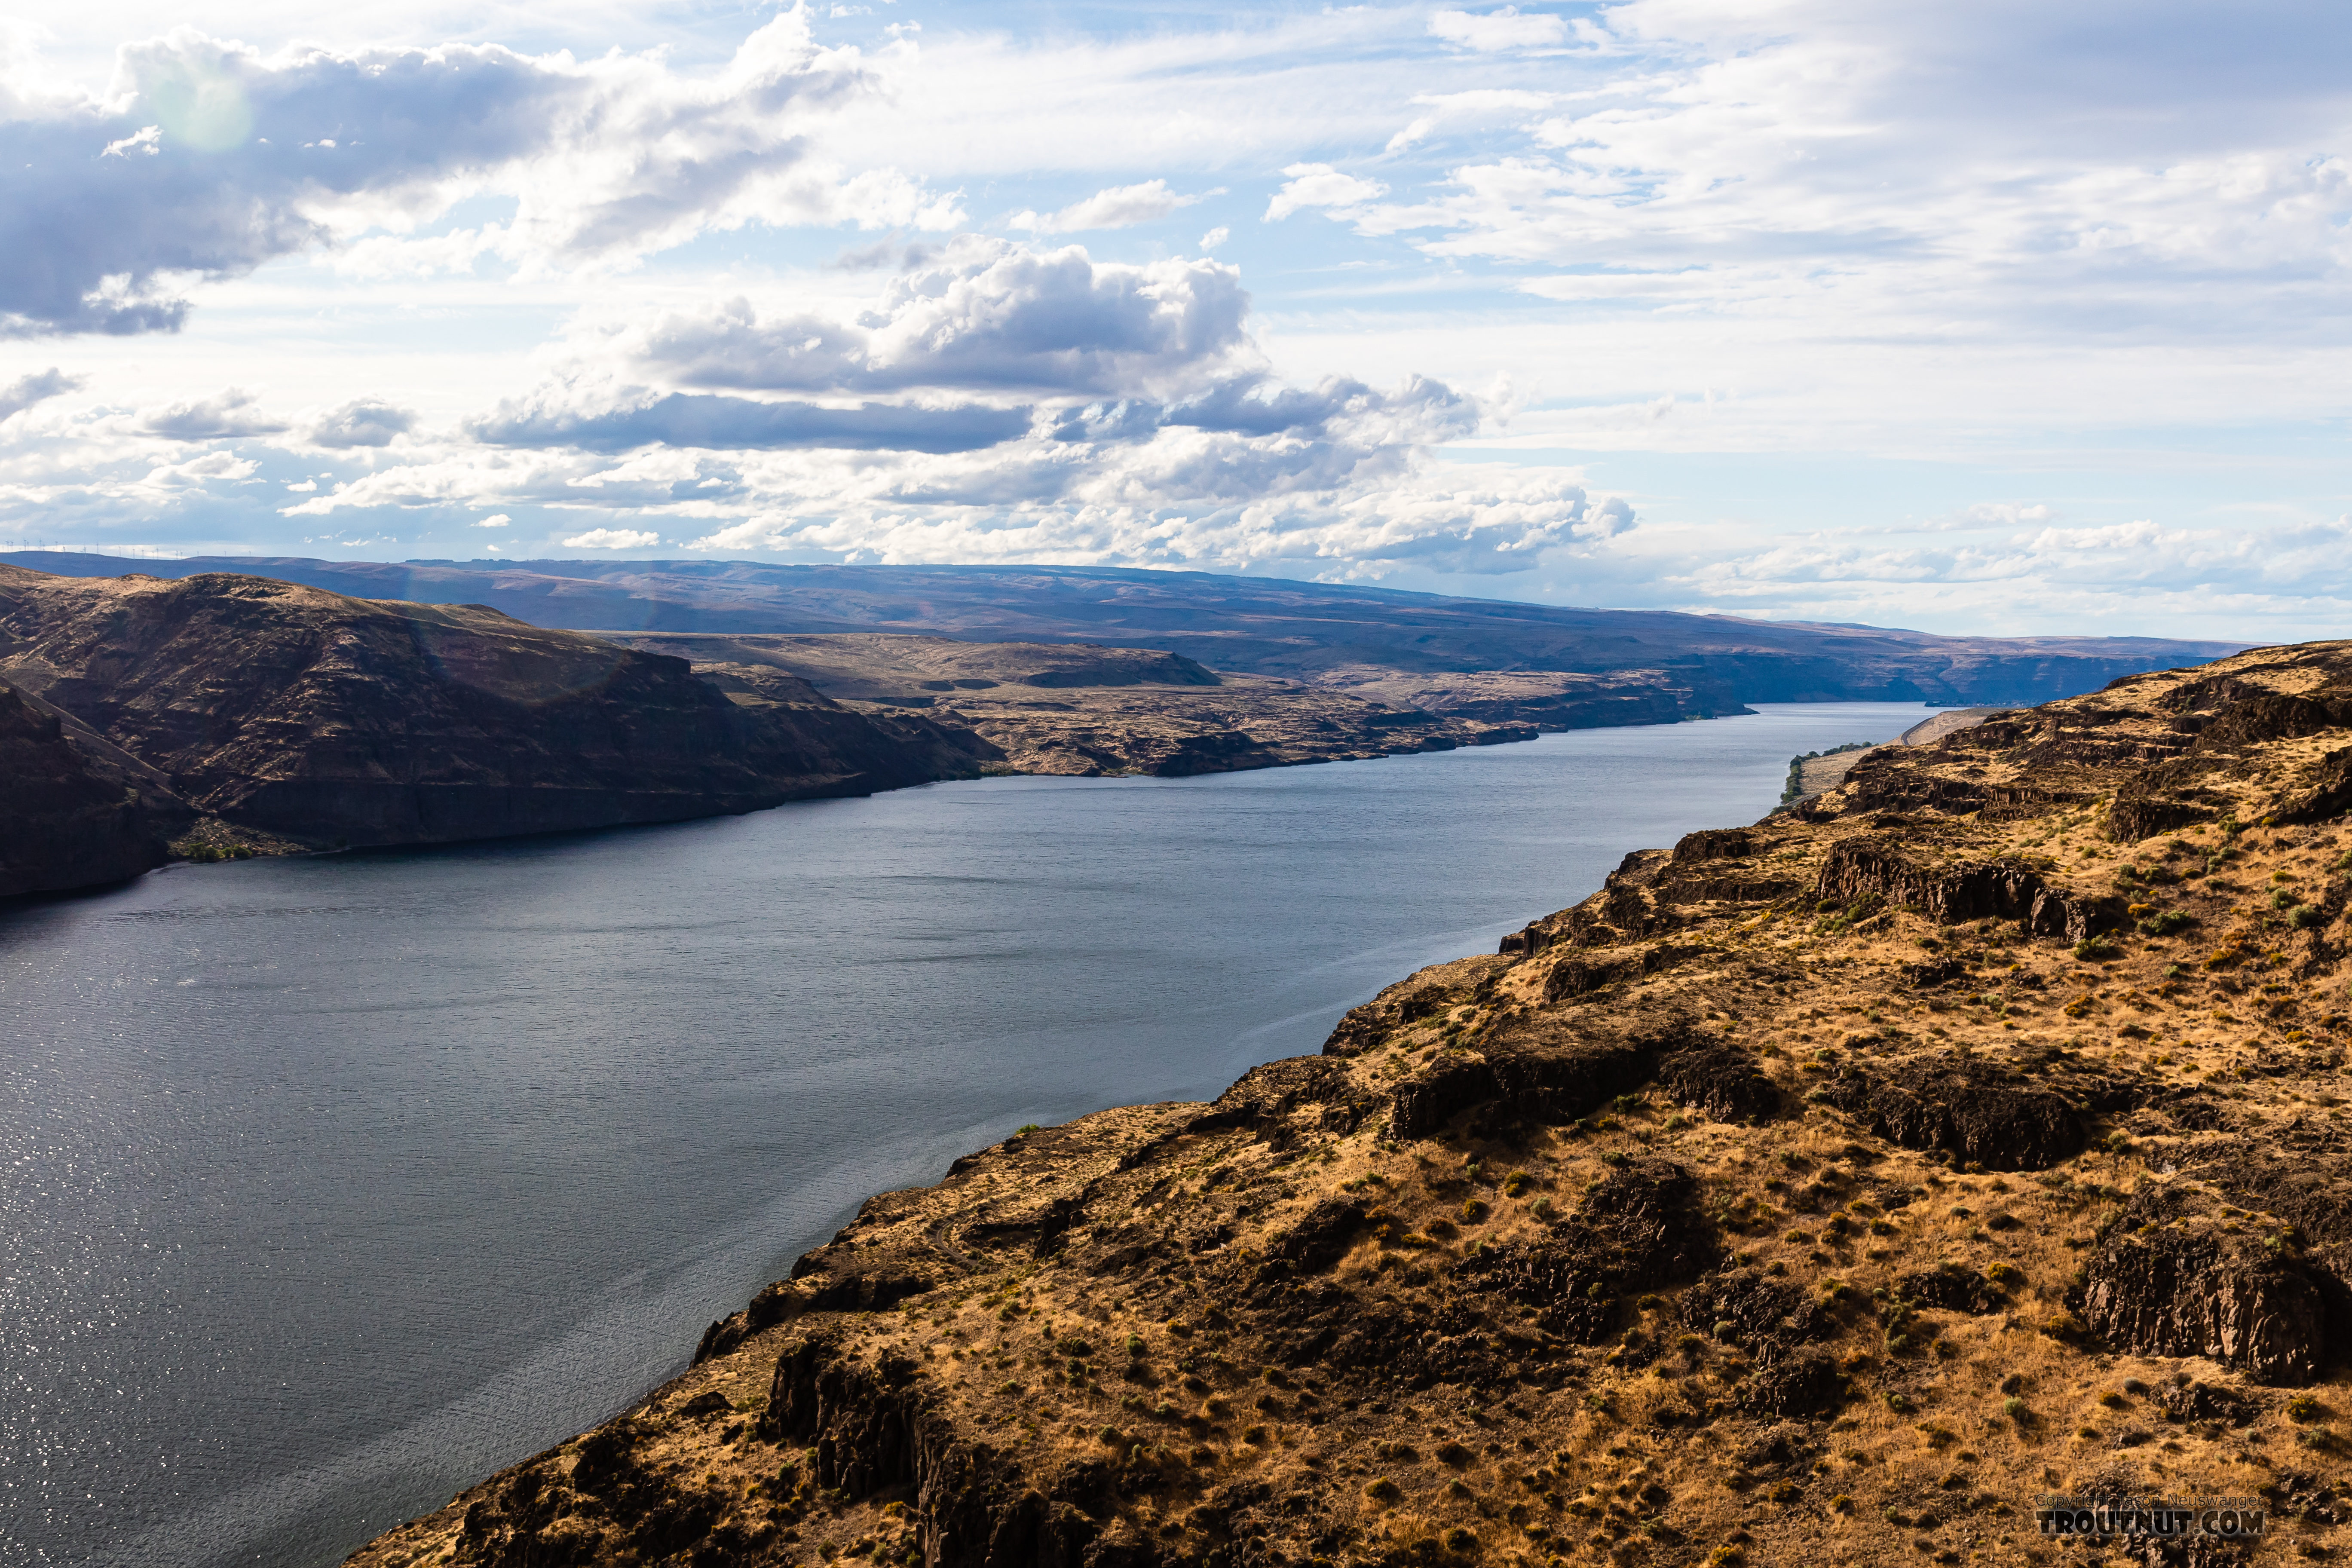 When driving home through eastern Washington we always like to stop at this overlook of the Columbia in the high desert. From the Columbia River in Washington.